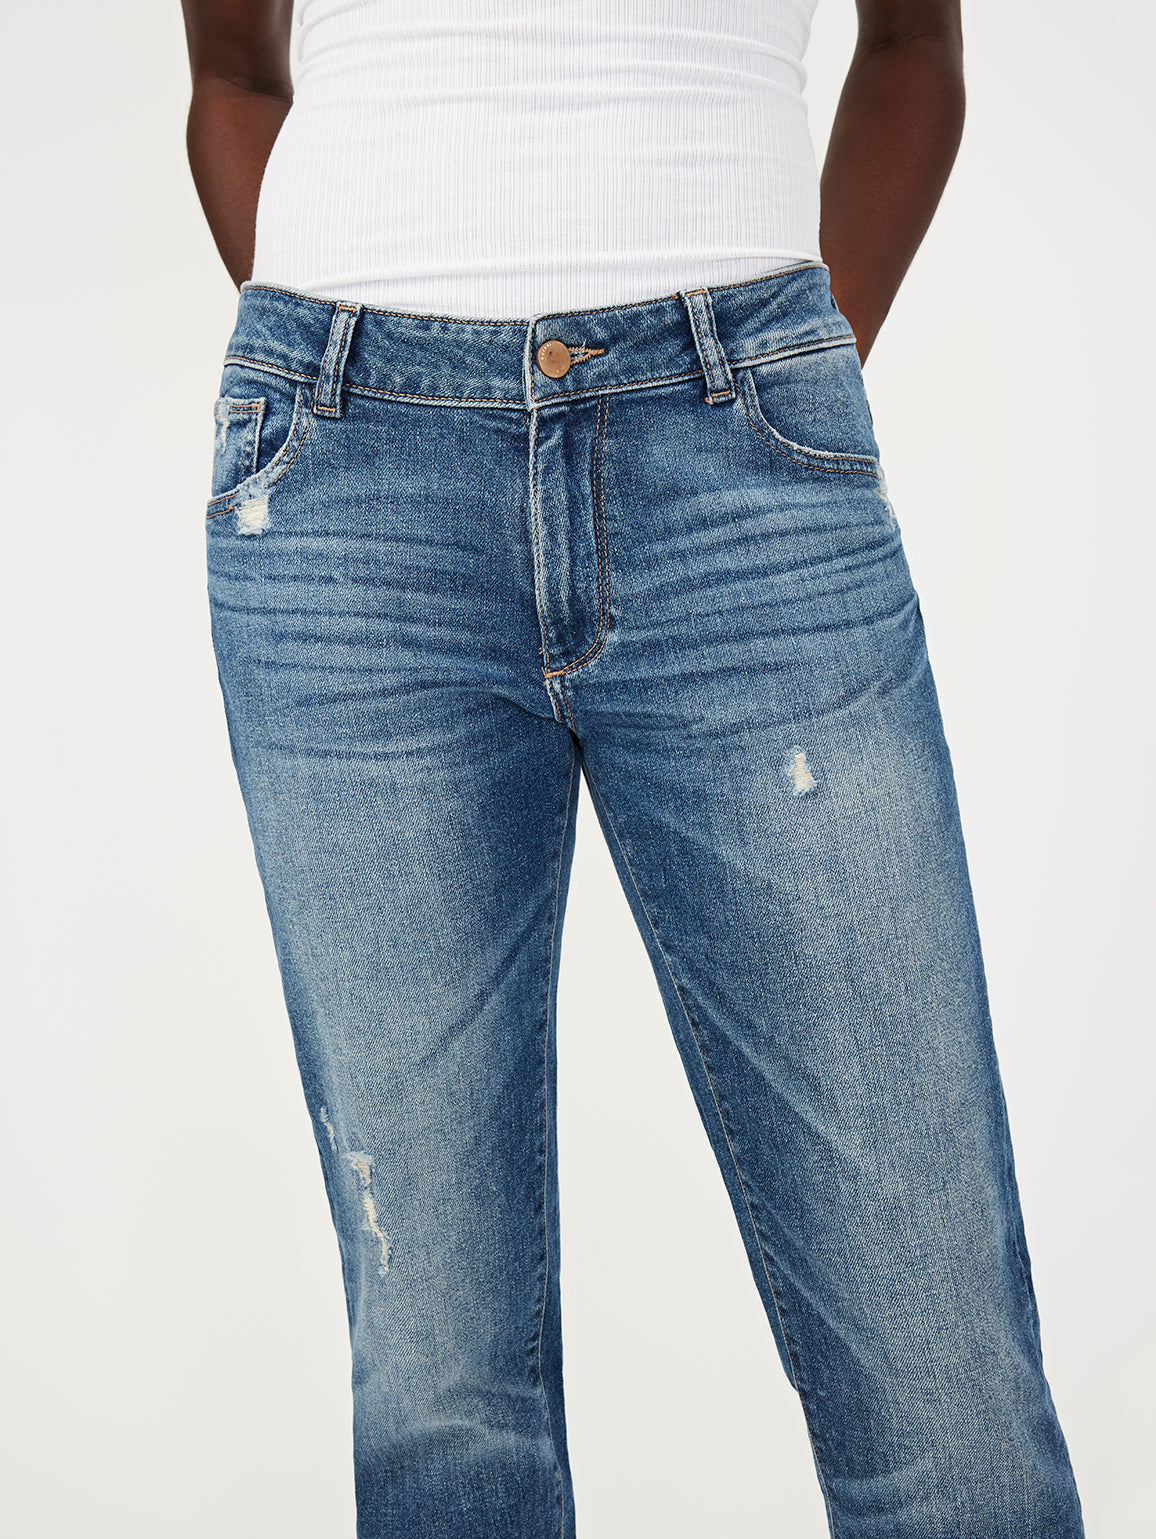 eco conscious vintage inspired boyfriend cut jeans in mid wash